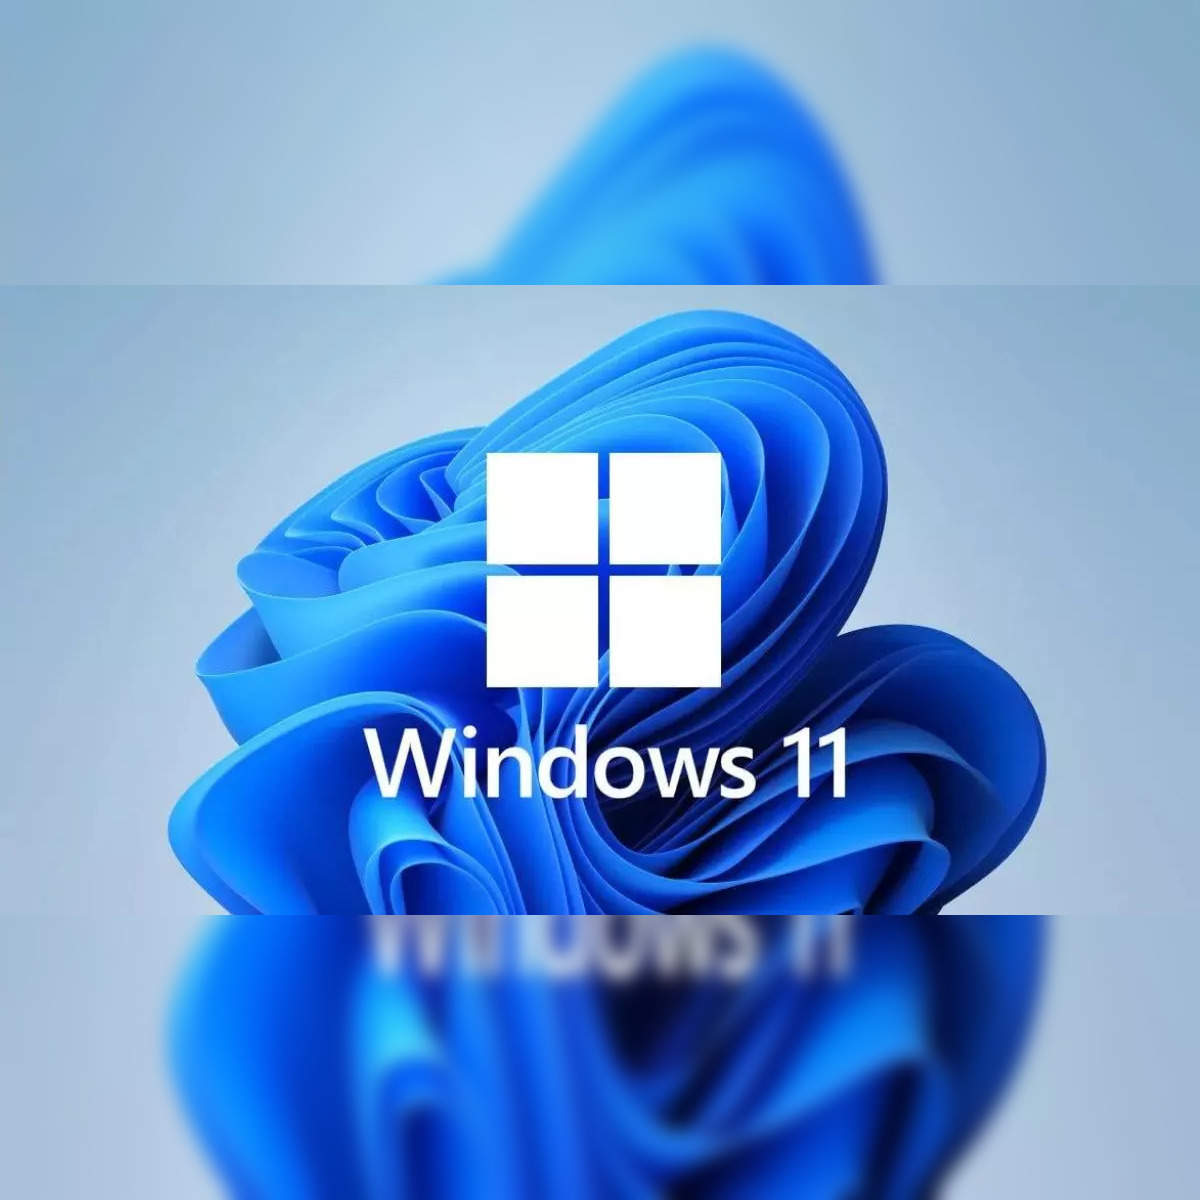 Windows 11 Update 23H2, top 5 Features to Expect 